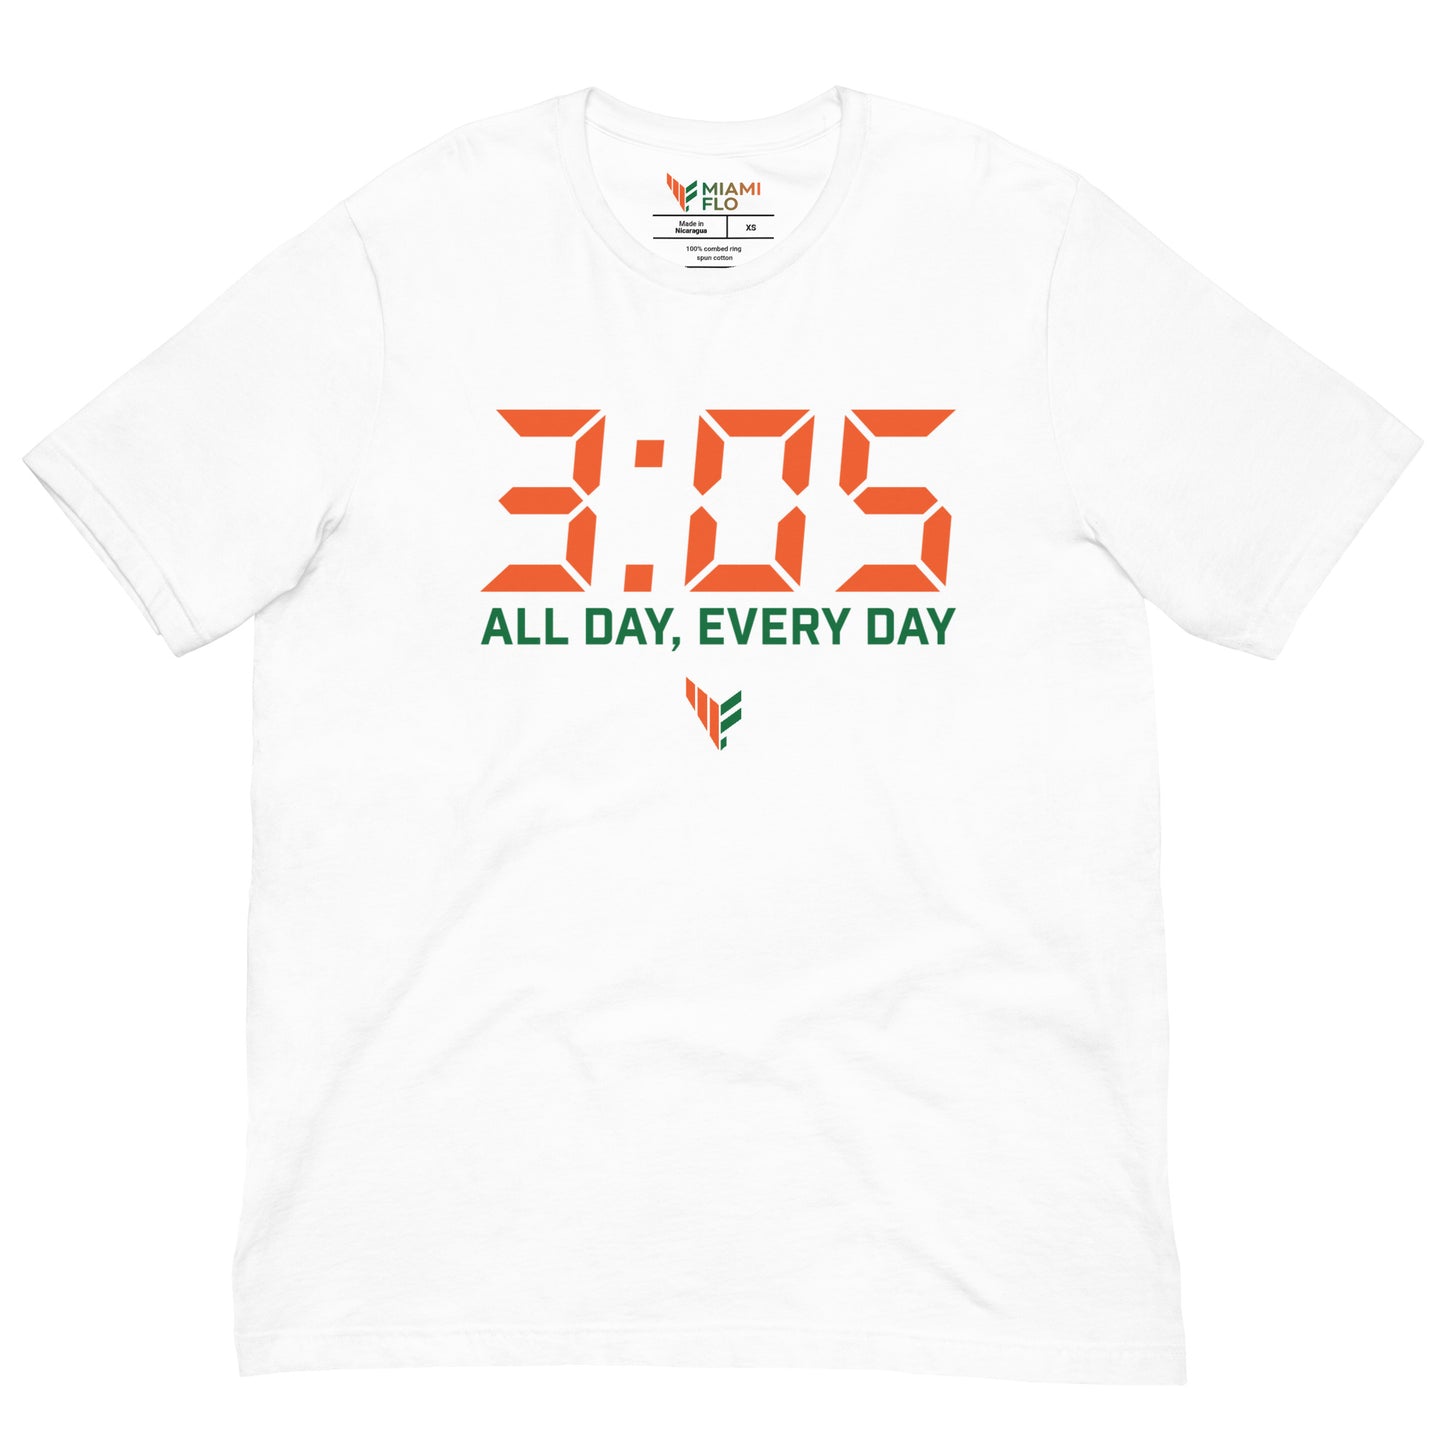 3:05 All Day, Every Day Shirt - Designed By Jas